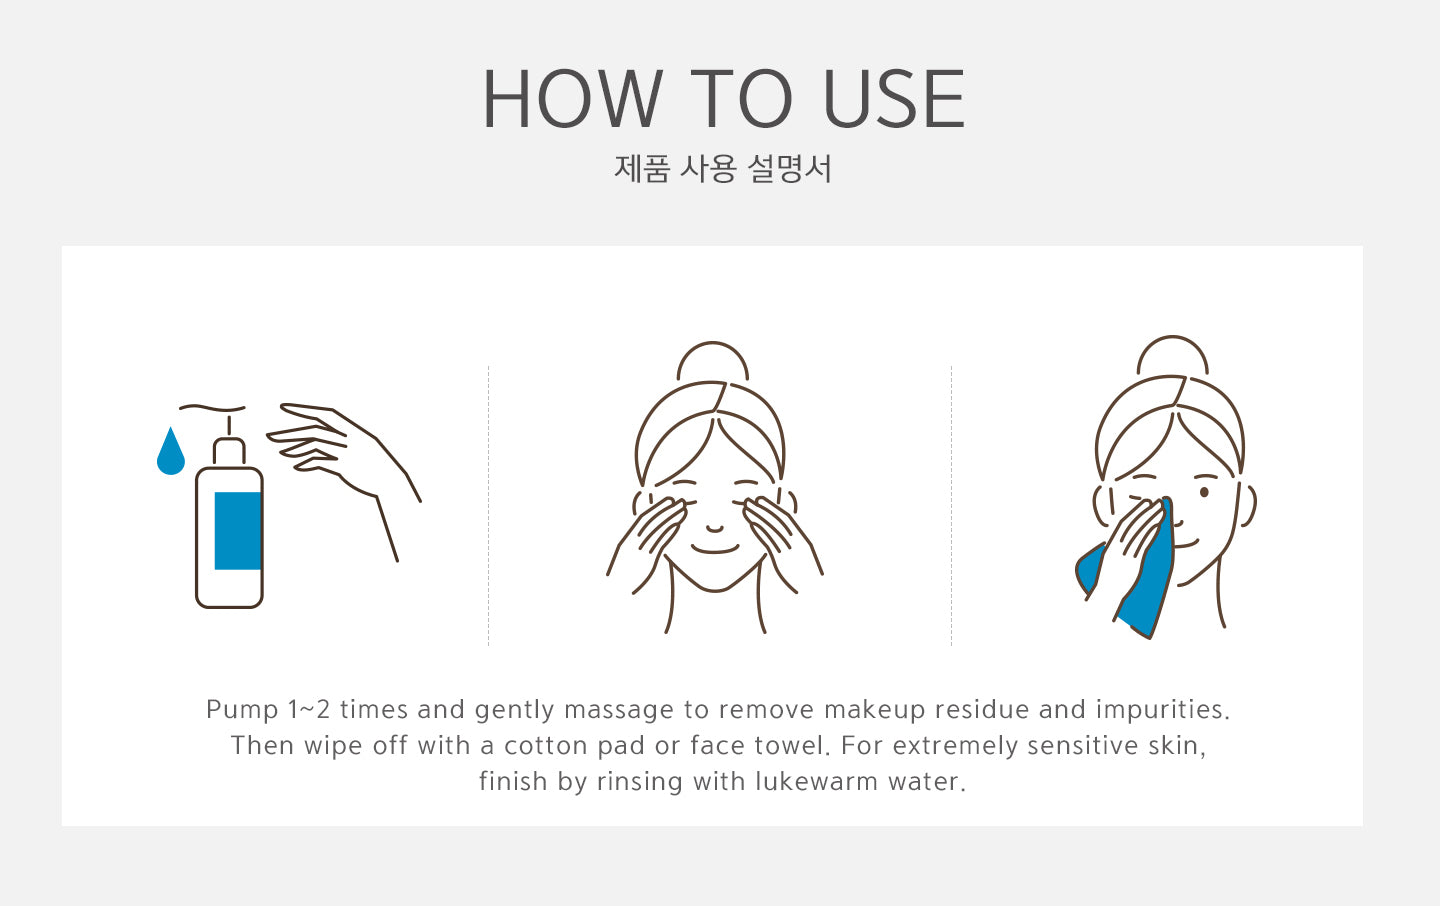 How to use? Pump 1-2 times and gently massage to remove makeup residue and impurities. Then wipe off with a cotton or face towel. For extremely sensitive skin, finish by rinsing with lukewarm water. 